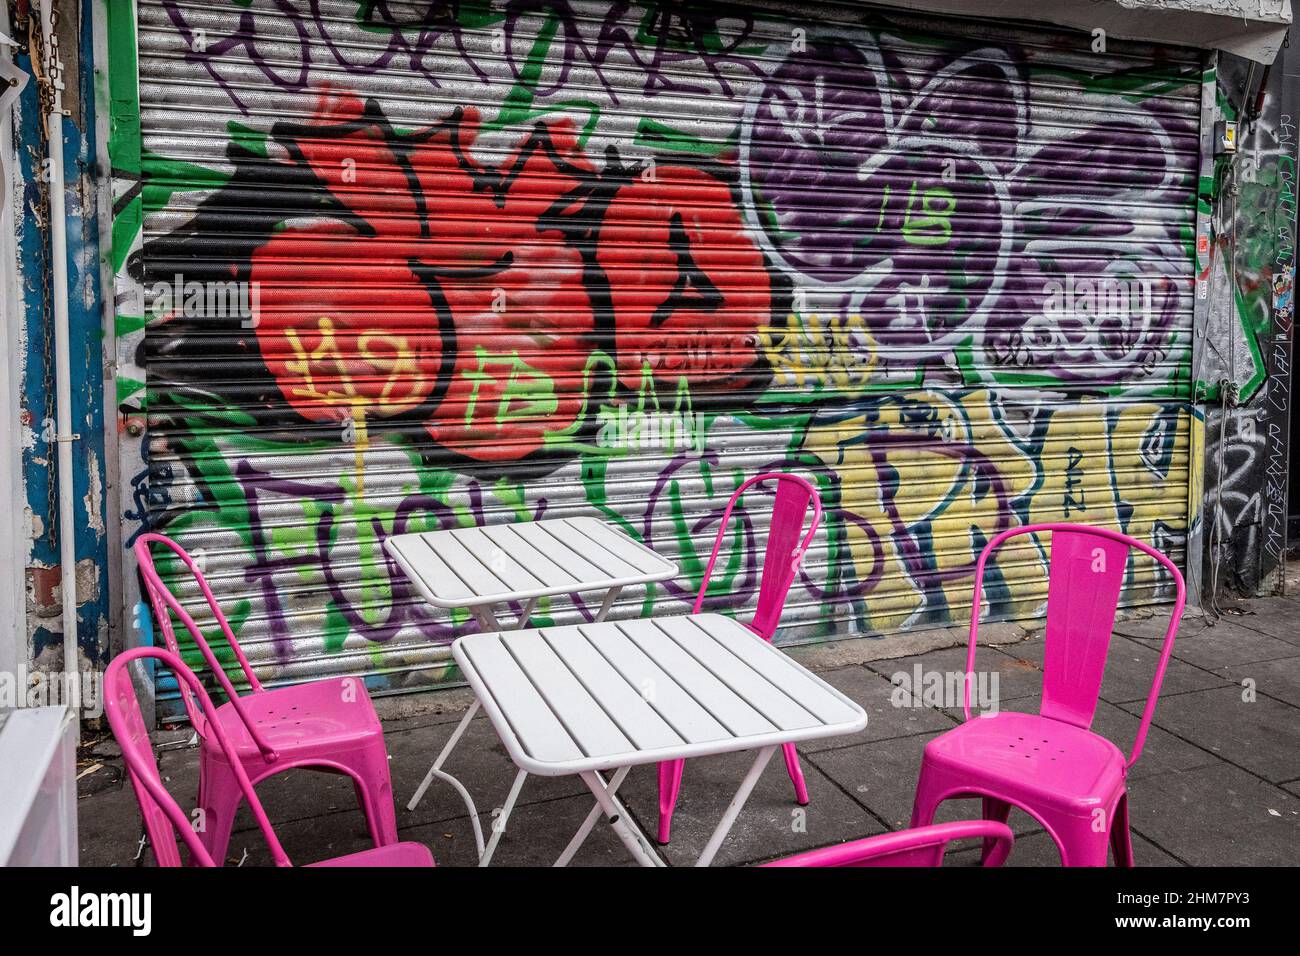 Street art on closed security shutters at cafe in Camden Town London , deserted with no customers, empty chairs. Stock Photo